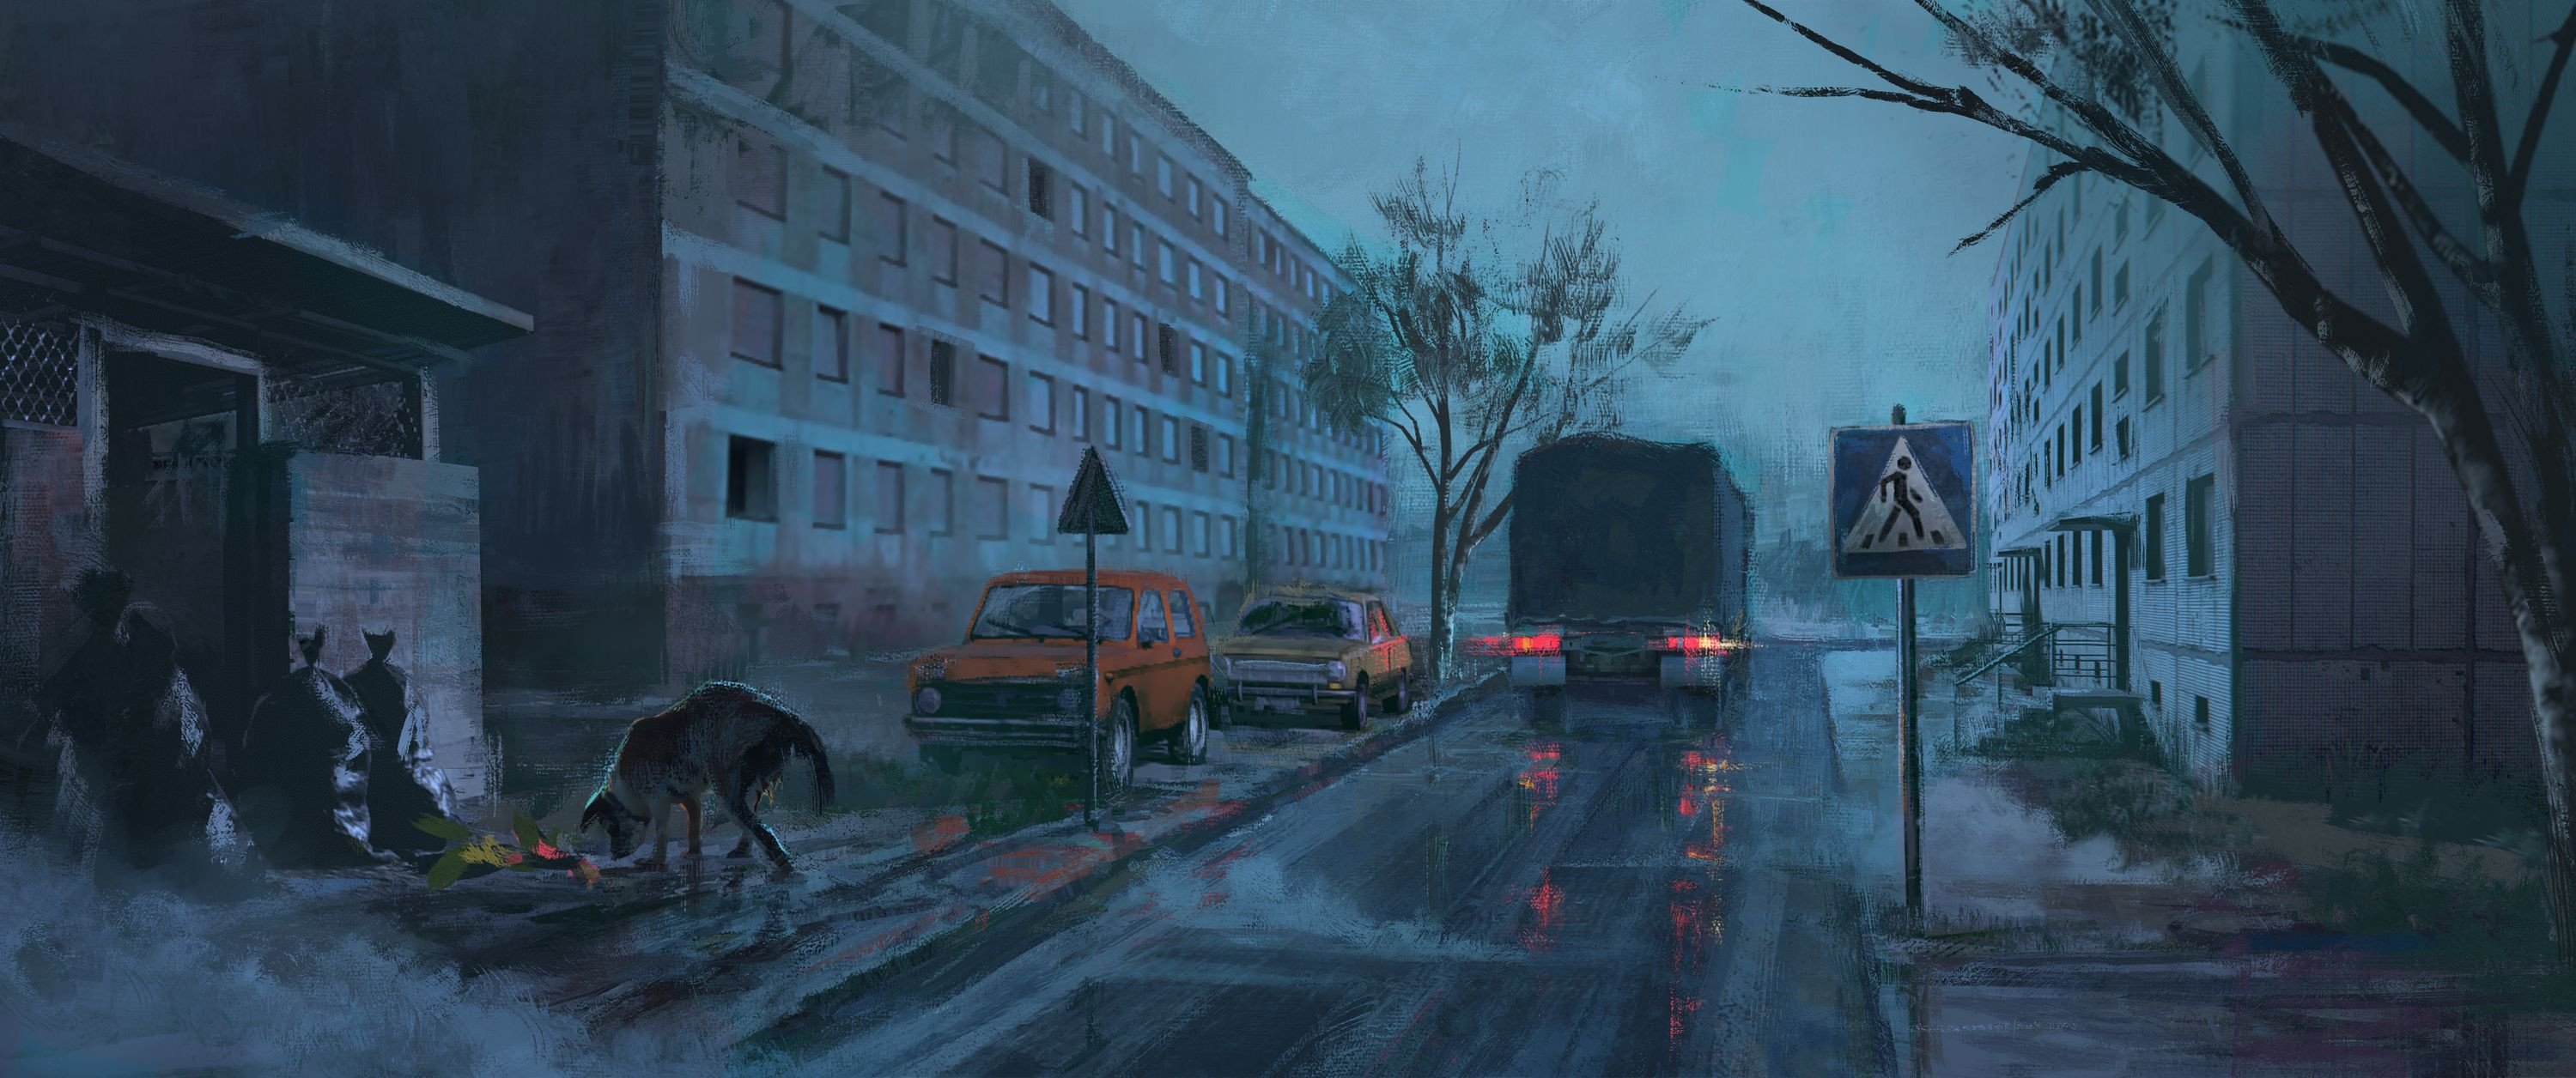 Unfinished alternative version. Inspired by composition and palette of Simon Stalenhag.